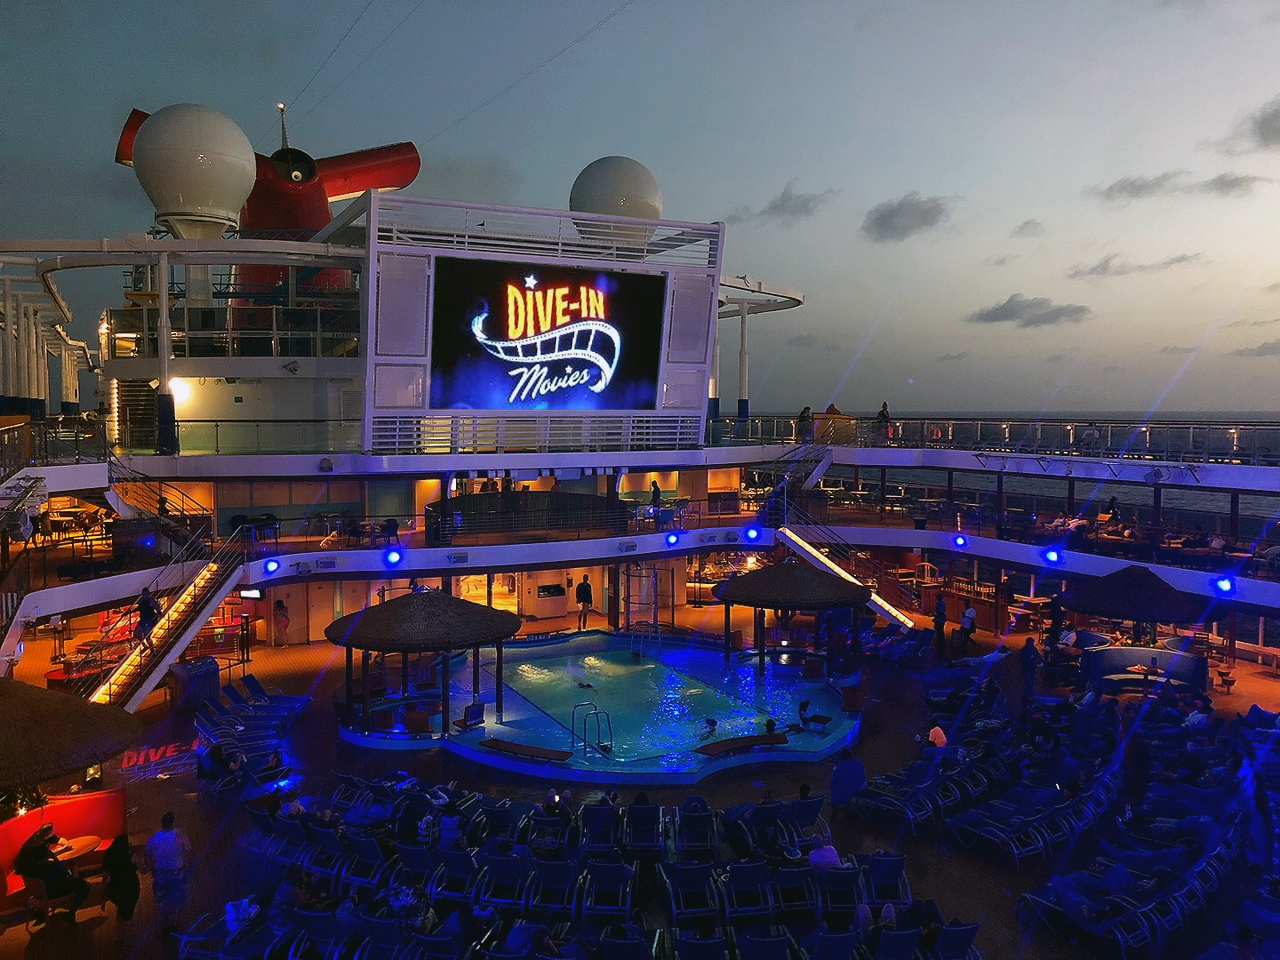 Night-time dive-in theater showing on a movie screen on the Carnival Vista